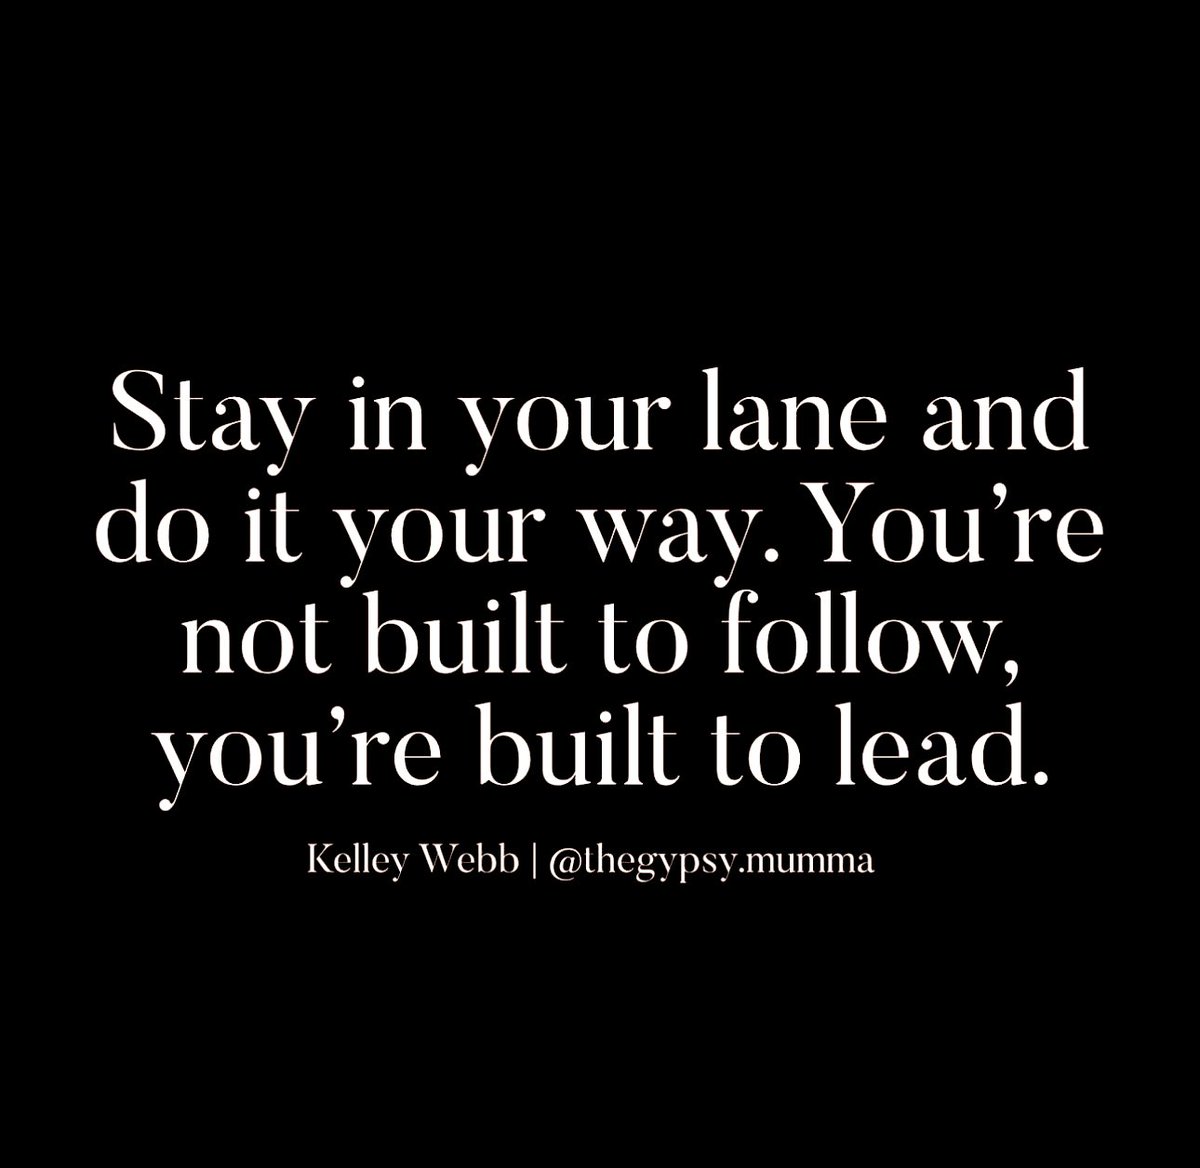 Happy Tuesday and your daily dose of inspiration!💕

You were born to lead!
Do your thing and never deviate!💕

Grateful for the opportunity to live, love, and lead.💕

#ALLmeansALL #GreenfieldGuarantee #ProudtobeGUSD
#CultivateCuriosity
#TrustAndInspire
#TrustAndGrow